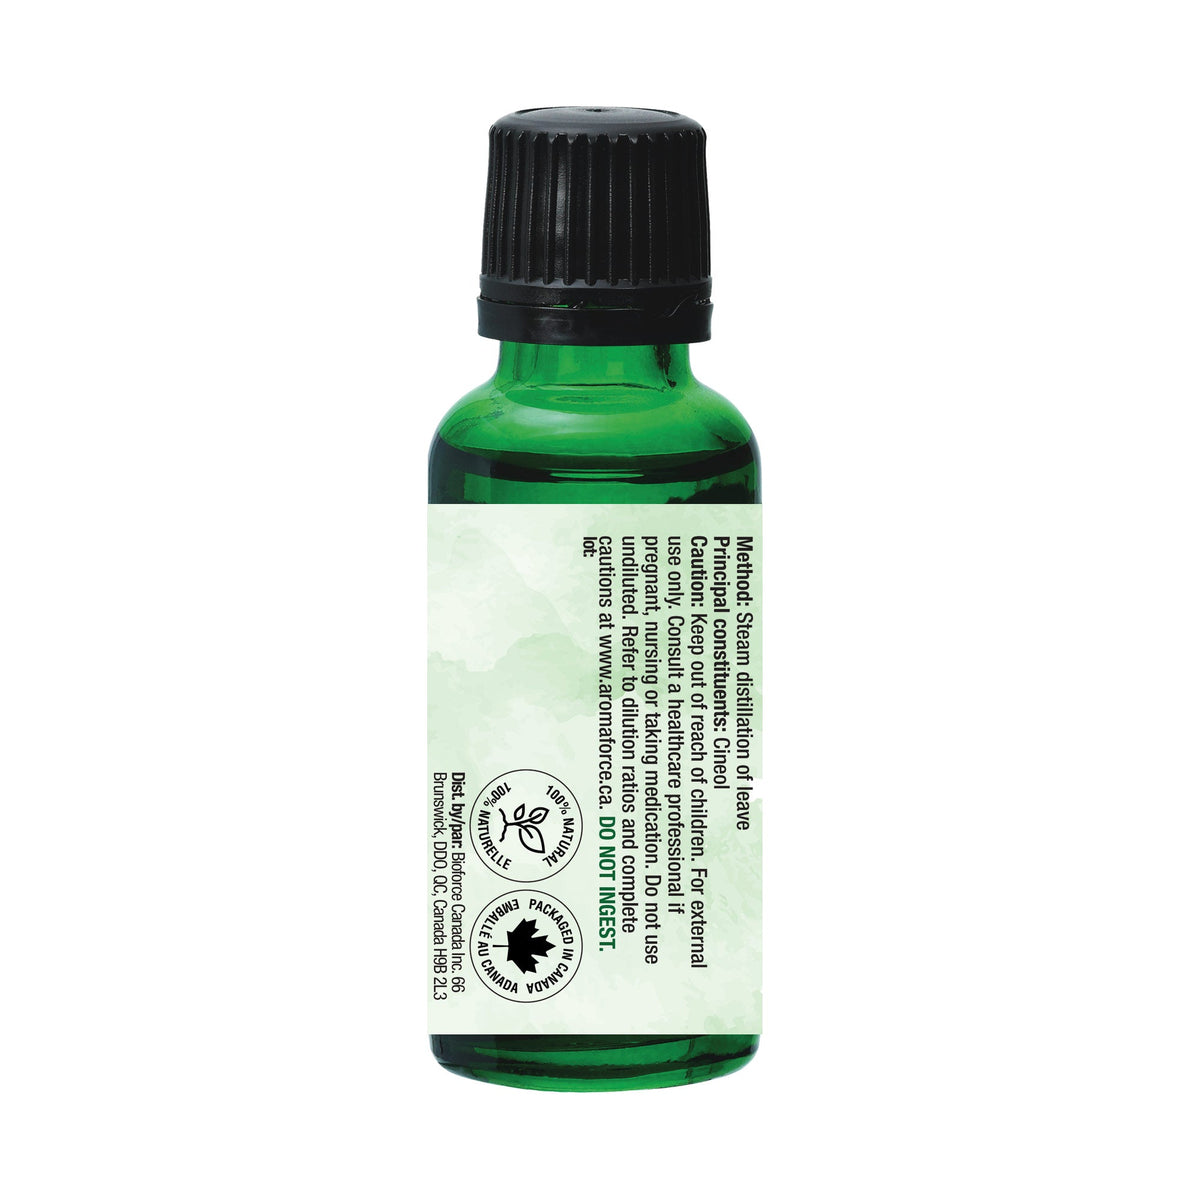 Ravintsara Organic Essential Oil 100% pure and natural 15mL - Aromaforce - A.Vogel Canada